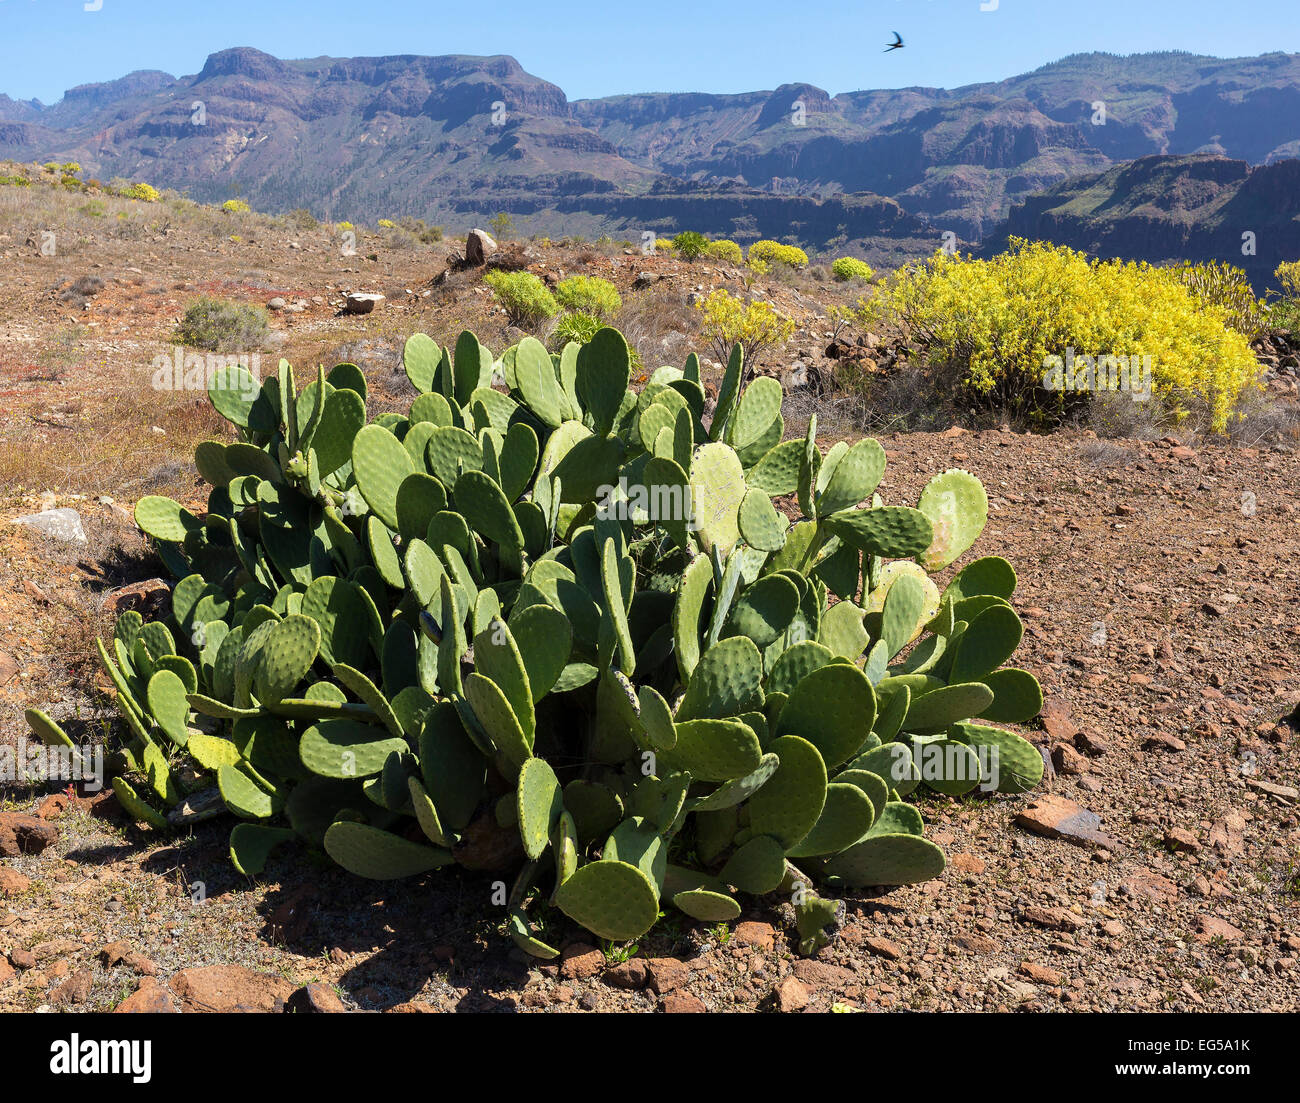 Mountain landscape with Prickly Pear Cactus (Opuntia), Gran Canaria, Canary Islands, Spain Stock Photo